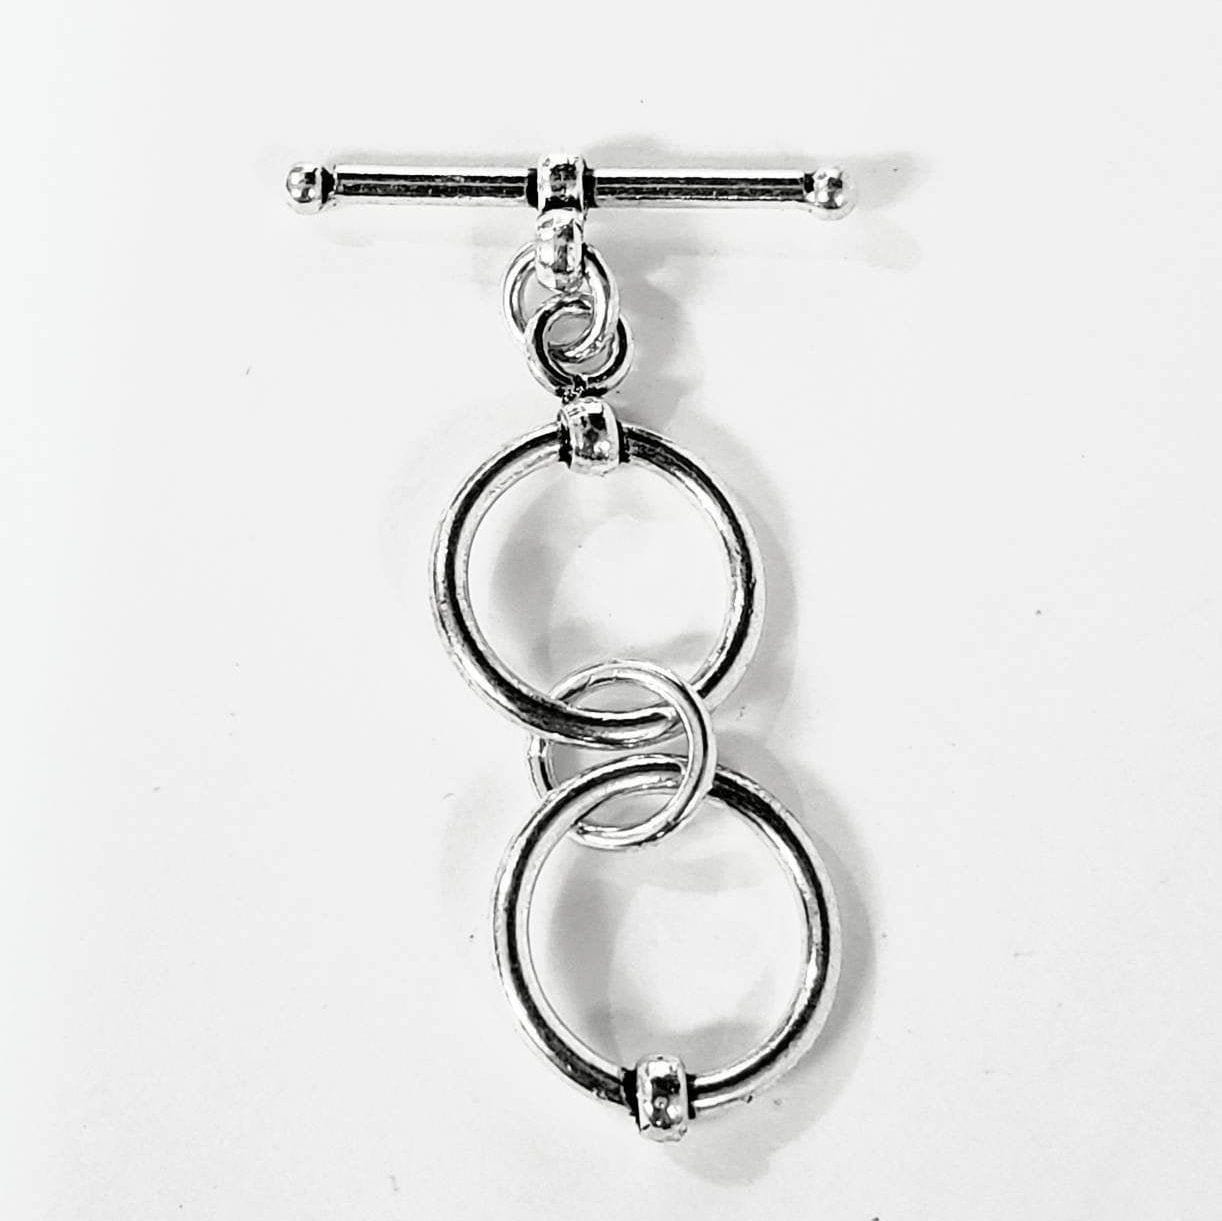 925 Sterling Silver Bali Toggle 14mm Clasp 2 Ring Adjustable Toggle. 1 set. Necklace, Bracelet, Jewelry Making Supply